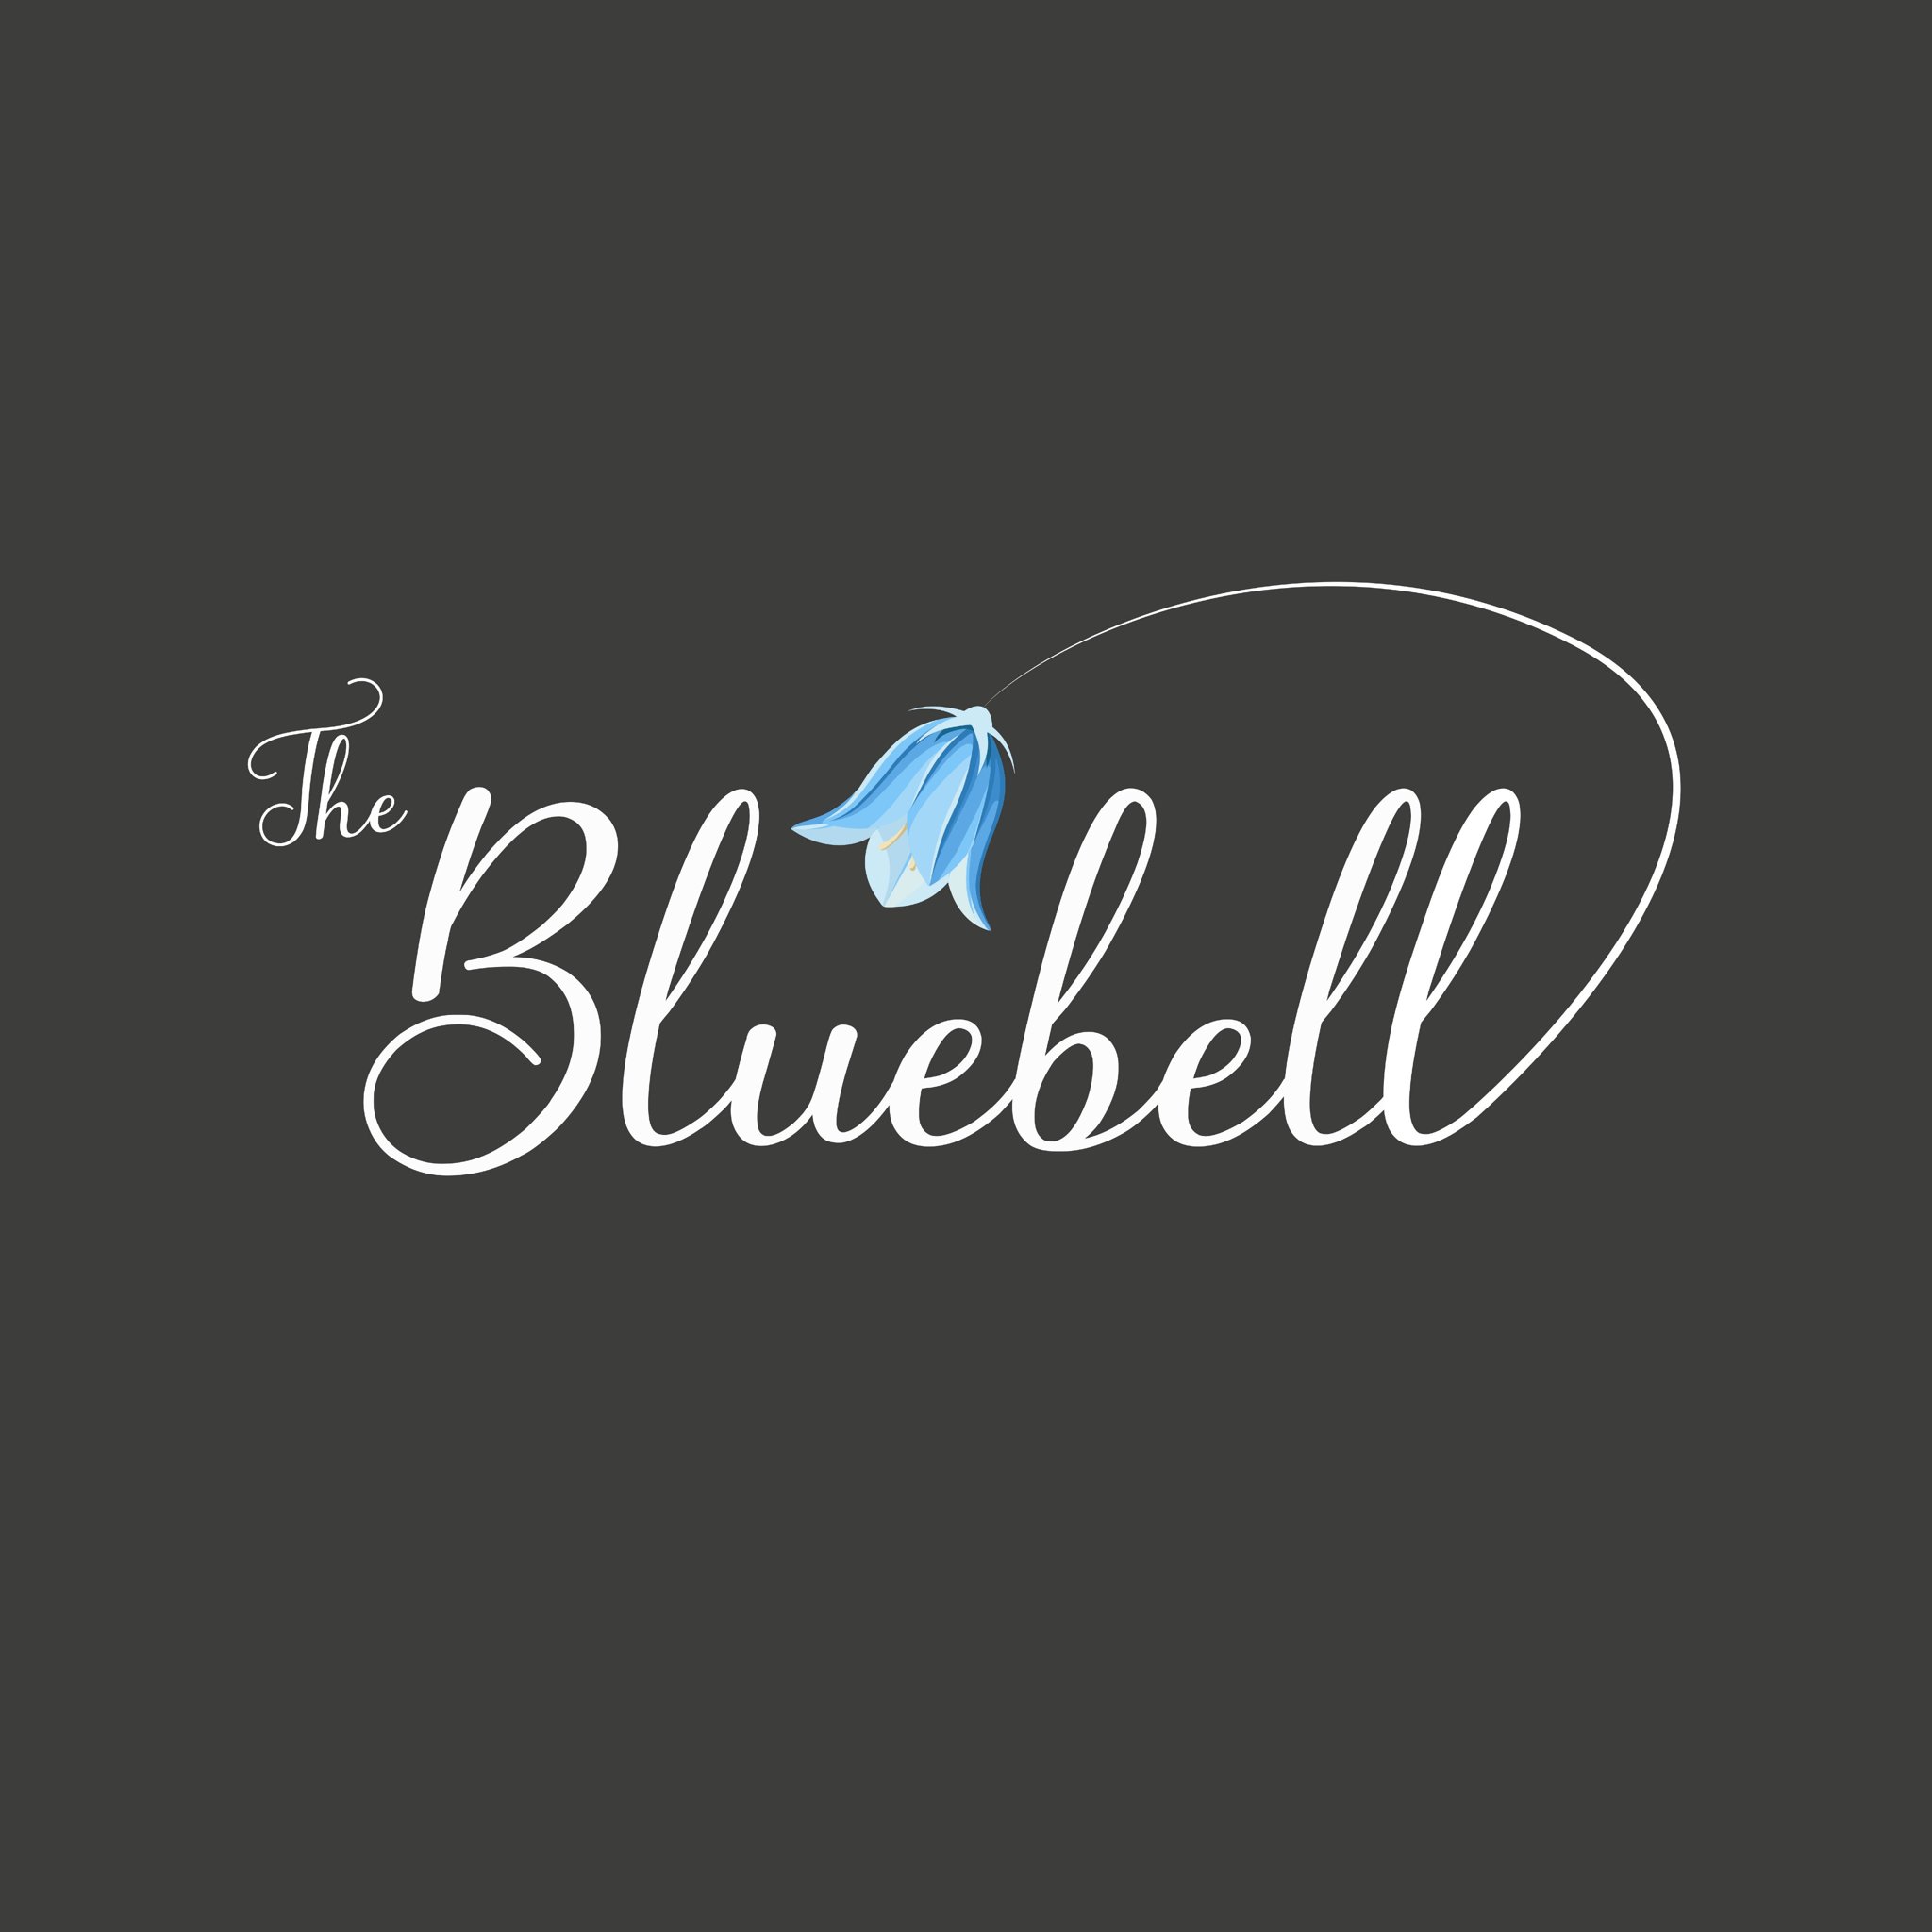 The Bluebell at South Wingfield, is a cosy pub side offering great drinks and modern food with traditional twists. Bookings hello@bluebellwingfield.co.uk